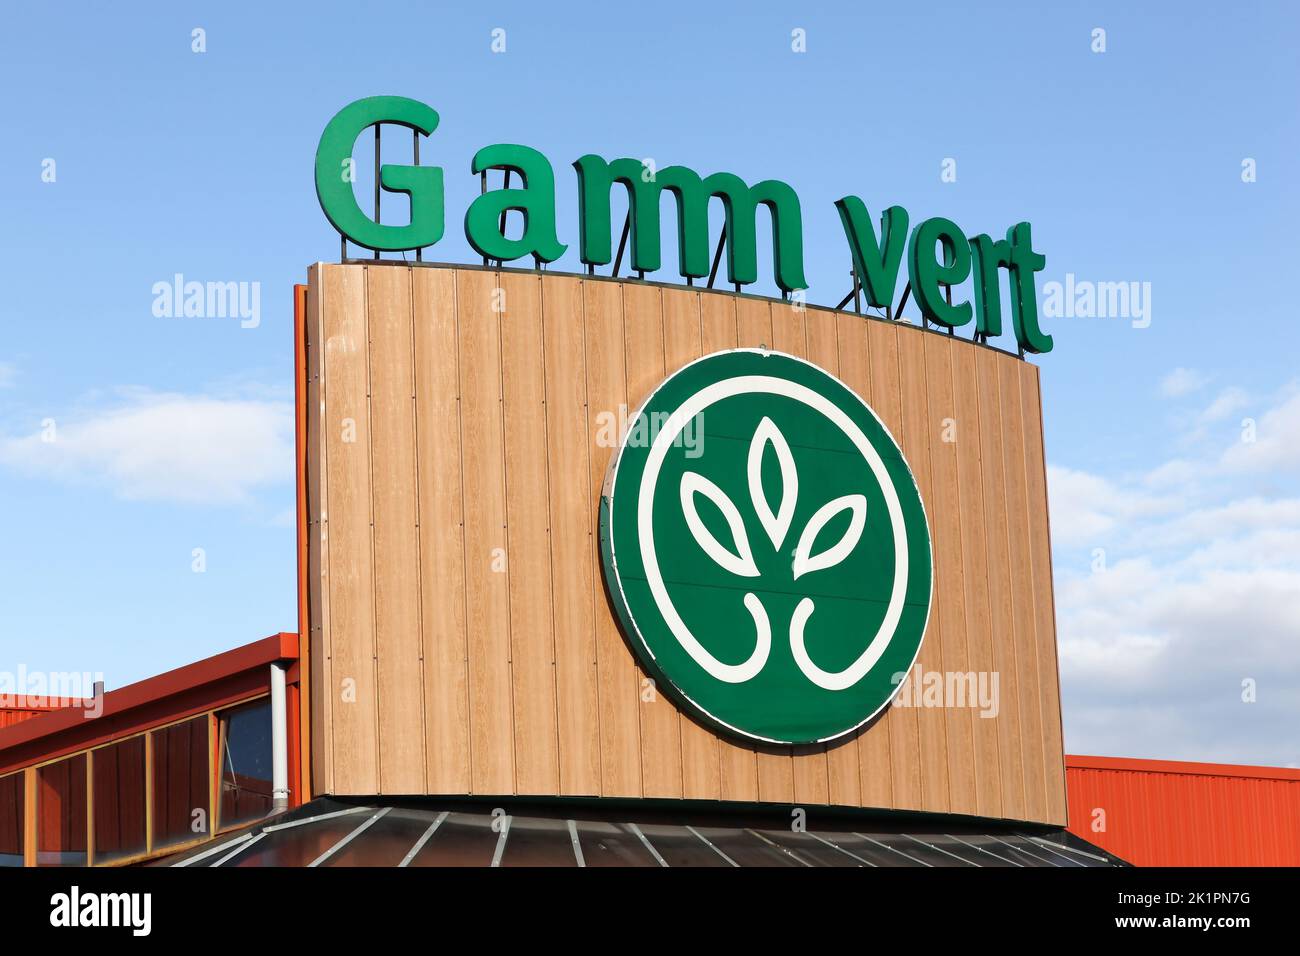 Montelimar, France - November 2, 2018: Gamm Vert is a garden center brand specializing in agricultural self-service, pet shops and local products Stock Photo